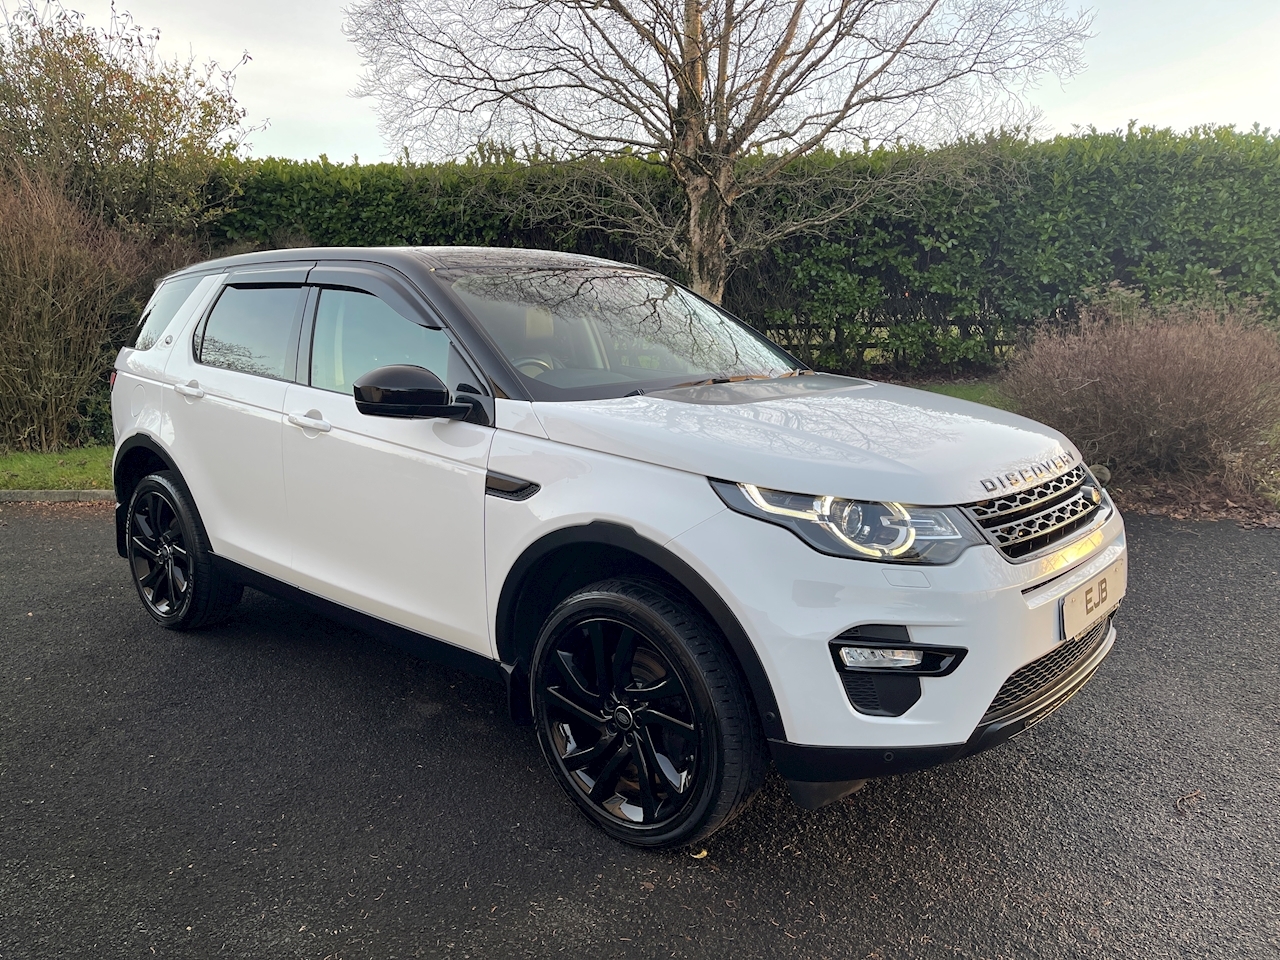 Discovery Sport TD4 HSE Luxury Black 2.0 5dr SUV Automatic Diesel